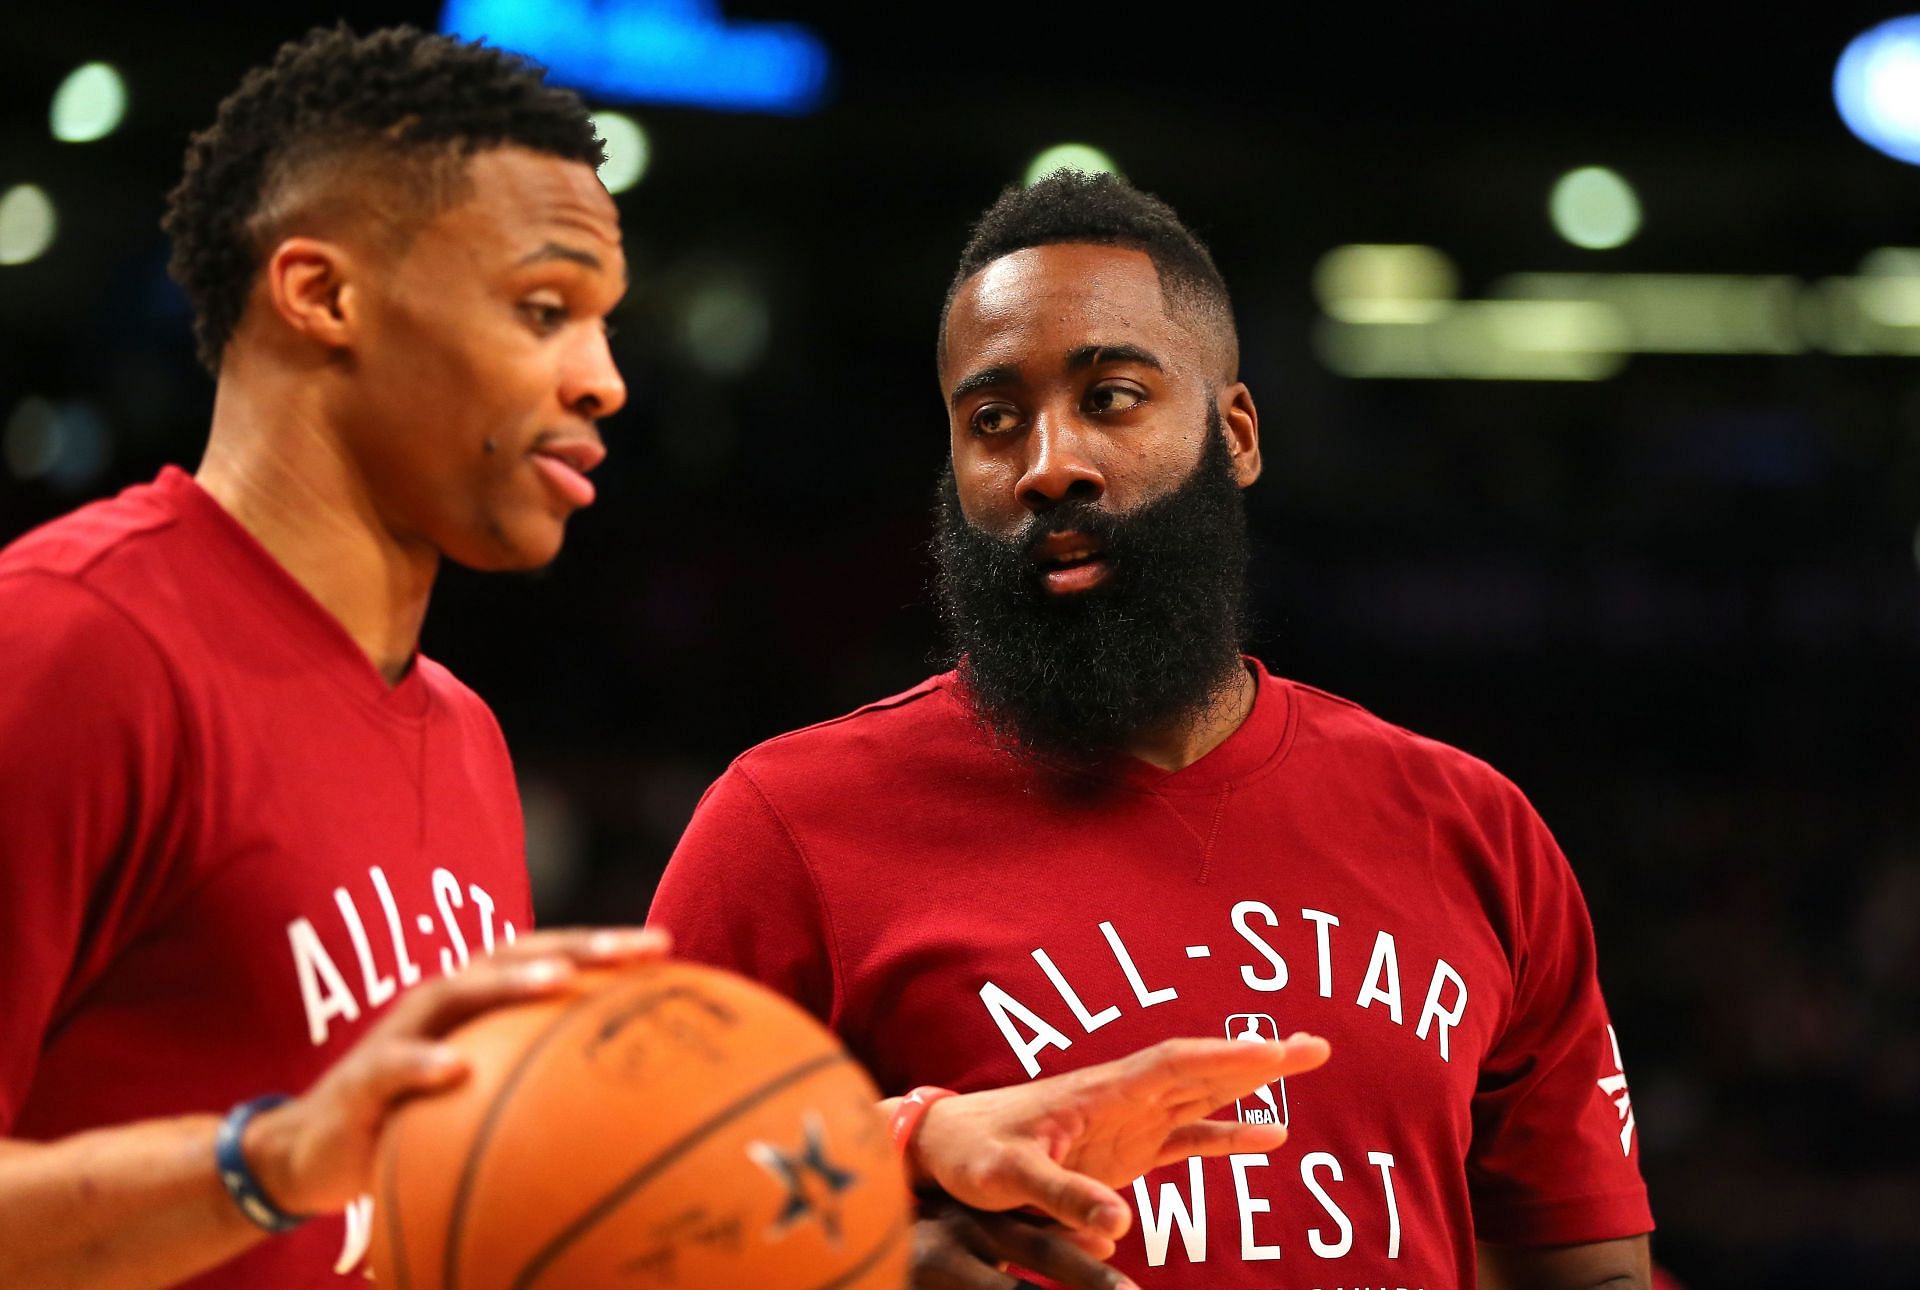 Russell Westbrook (left) and James Harden warm up before the All-Star Game 2016.